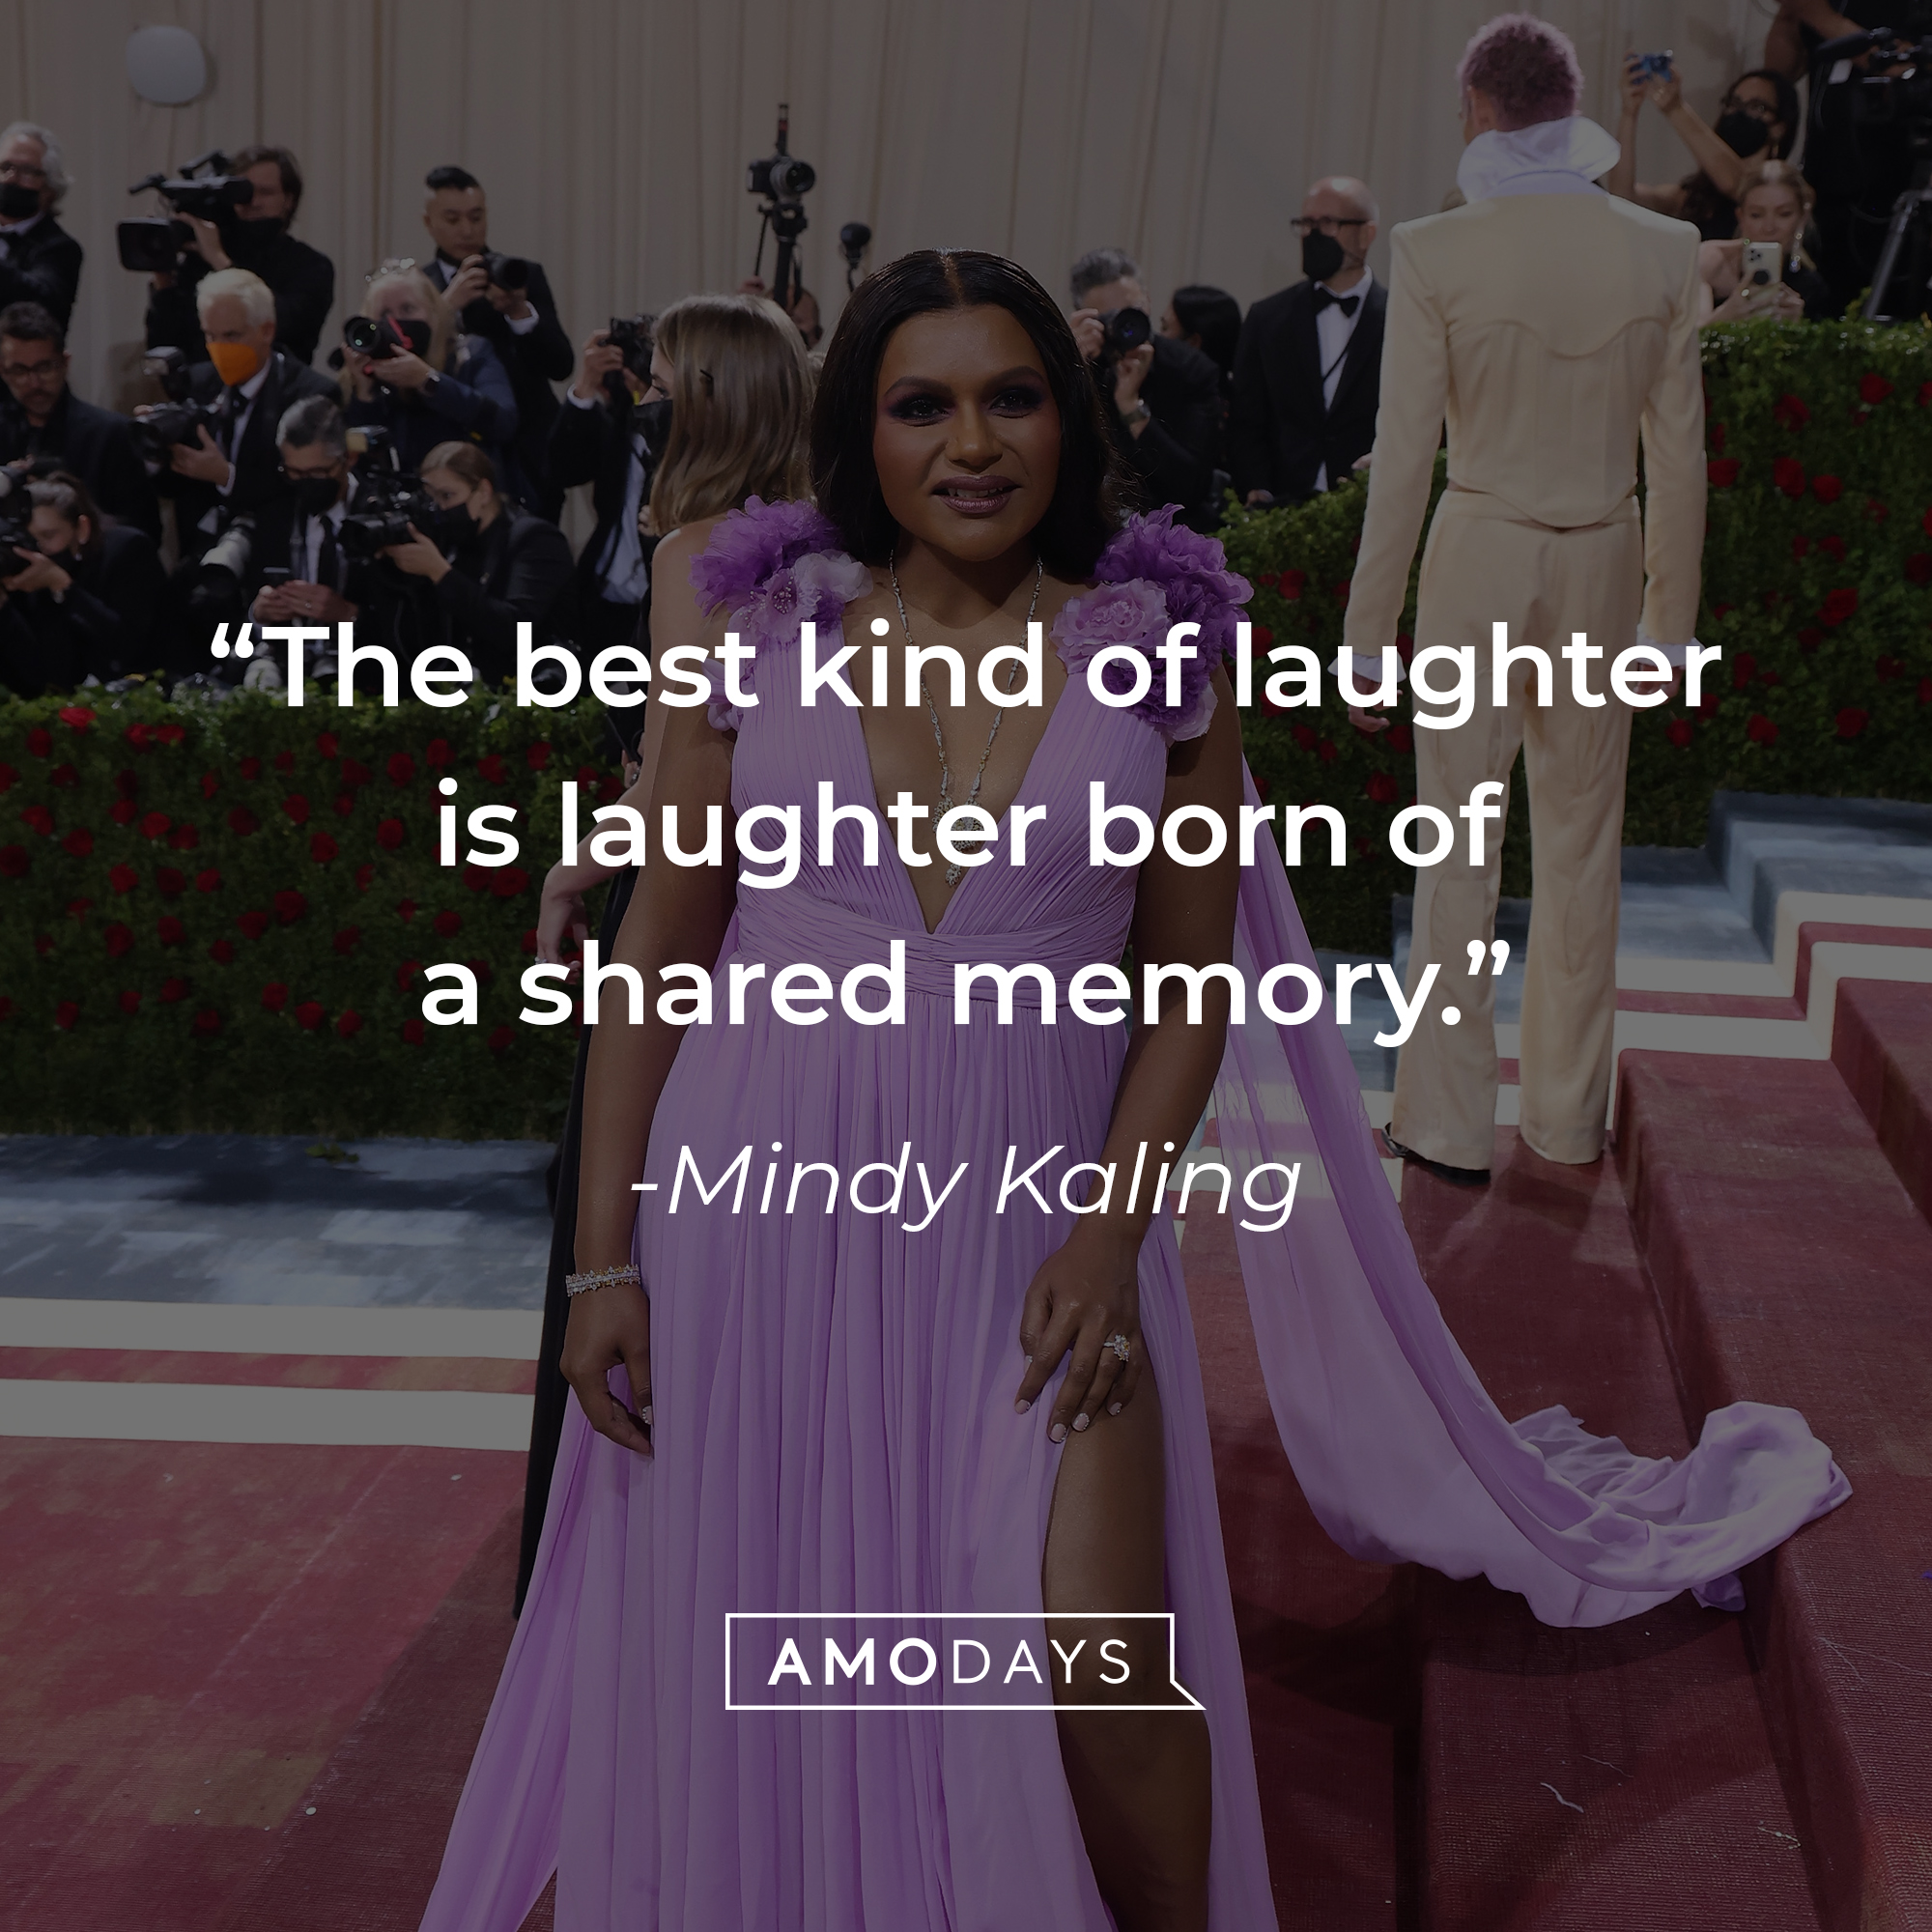 Mindy Kaling's quote: "The best kind of laughter is laughter born of a shared memory." | Source: Getty Images